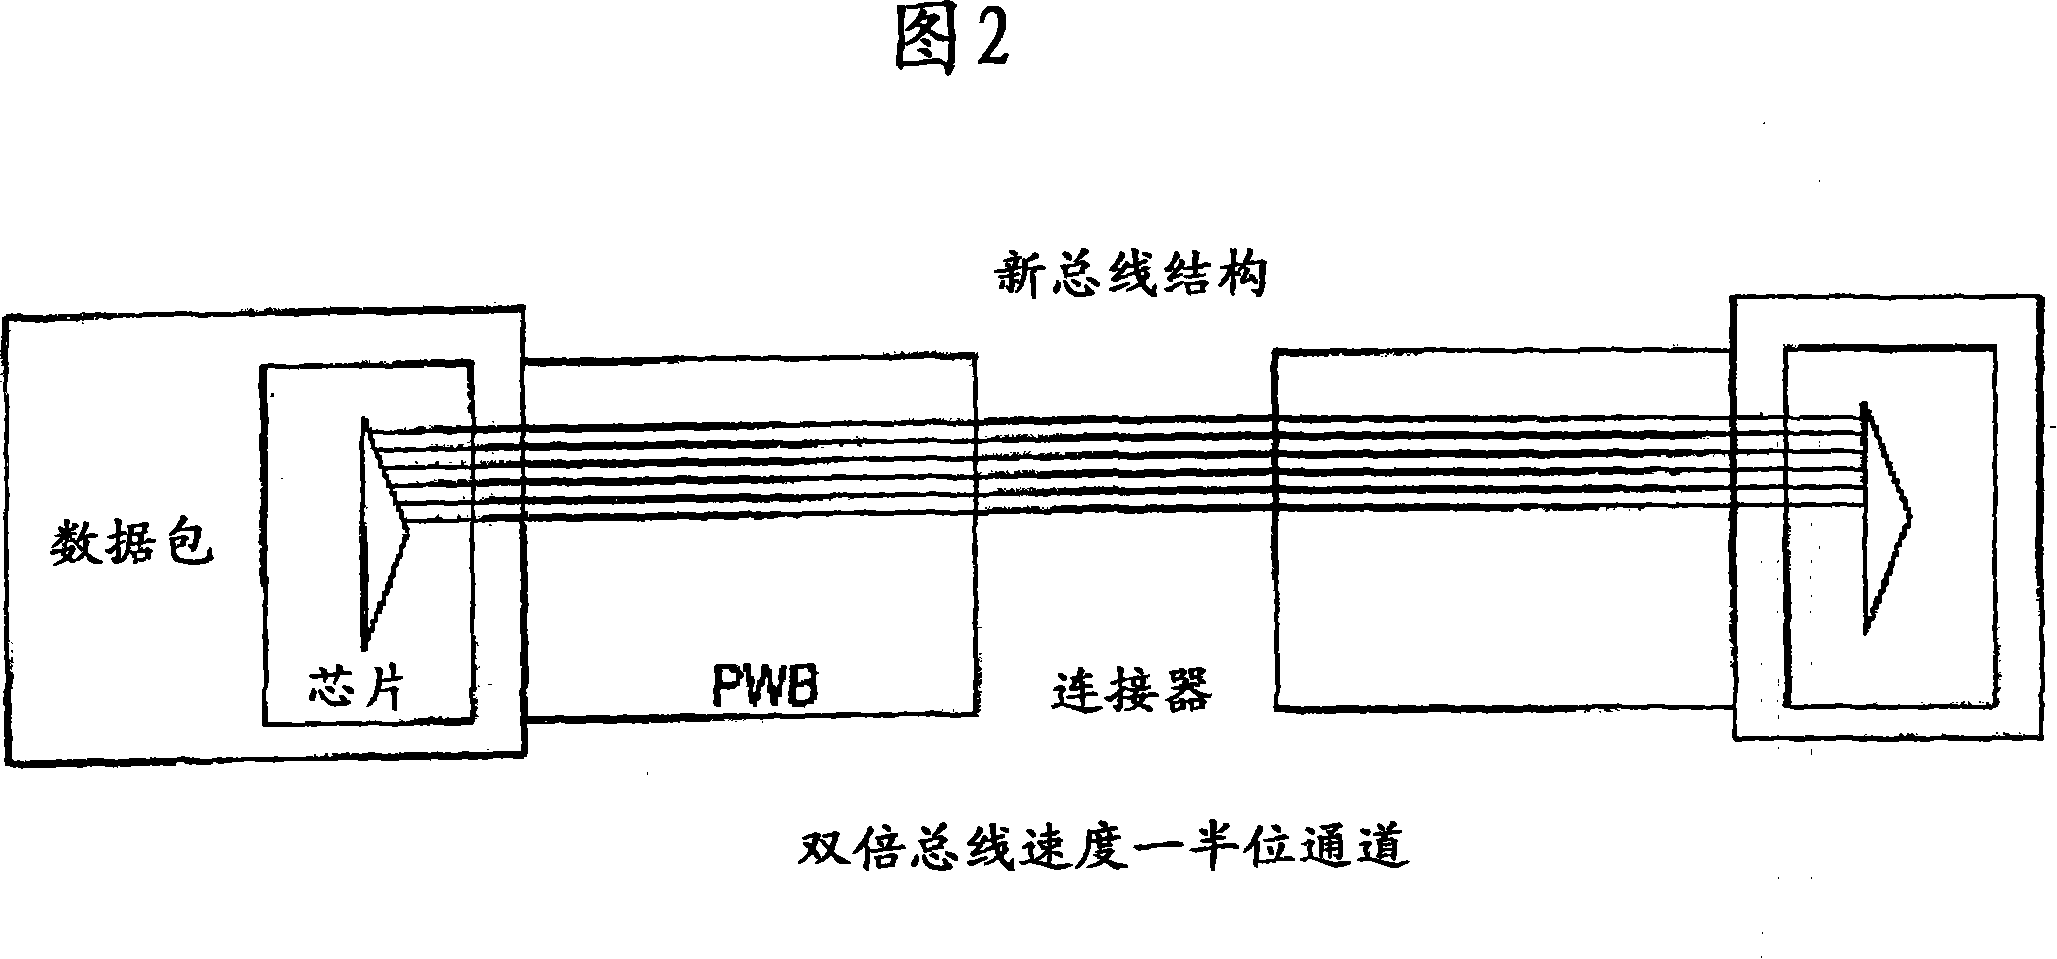 Systems, methods, and computer program products for providing a two-bit symbol bus error correcting code with bus timing improvements